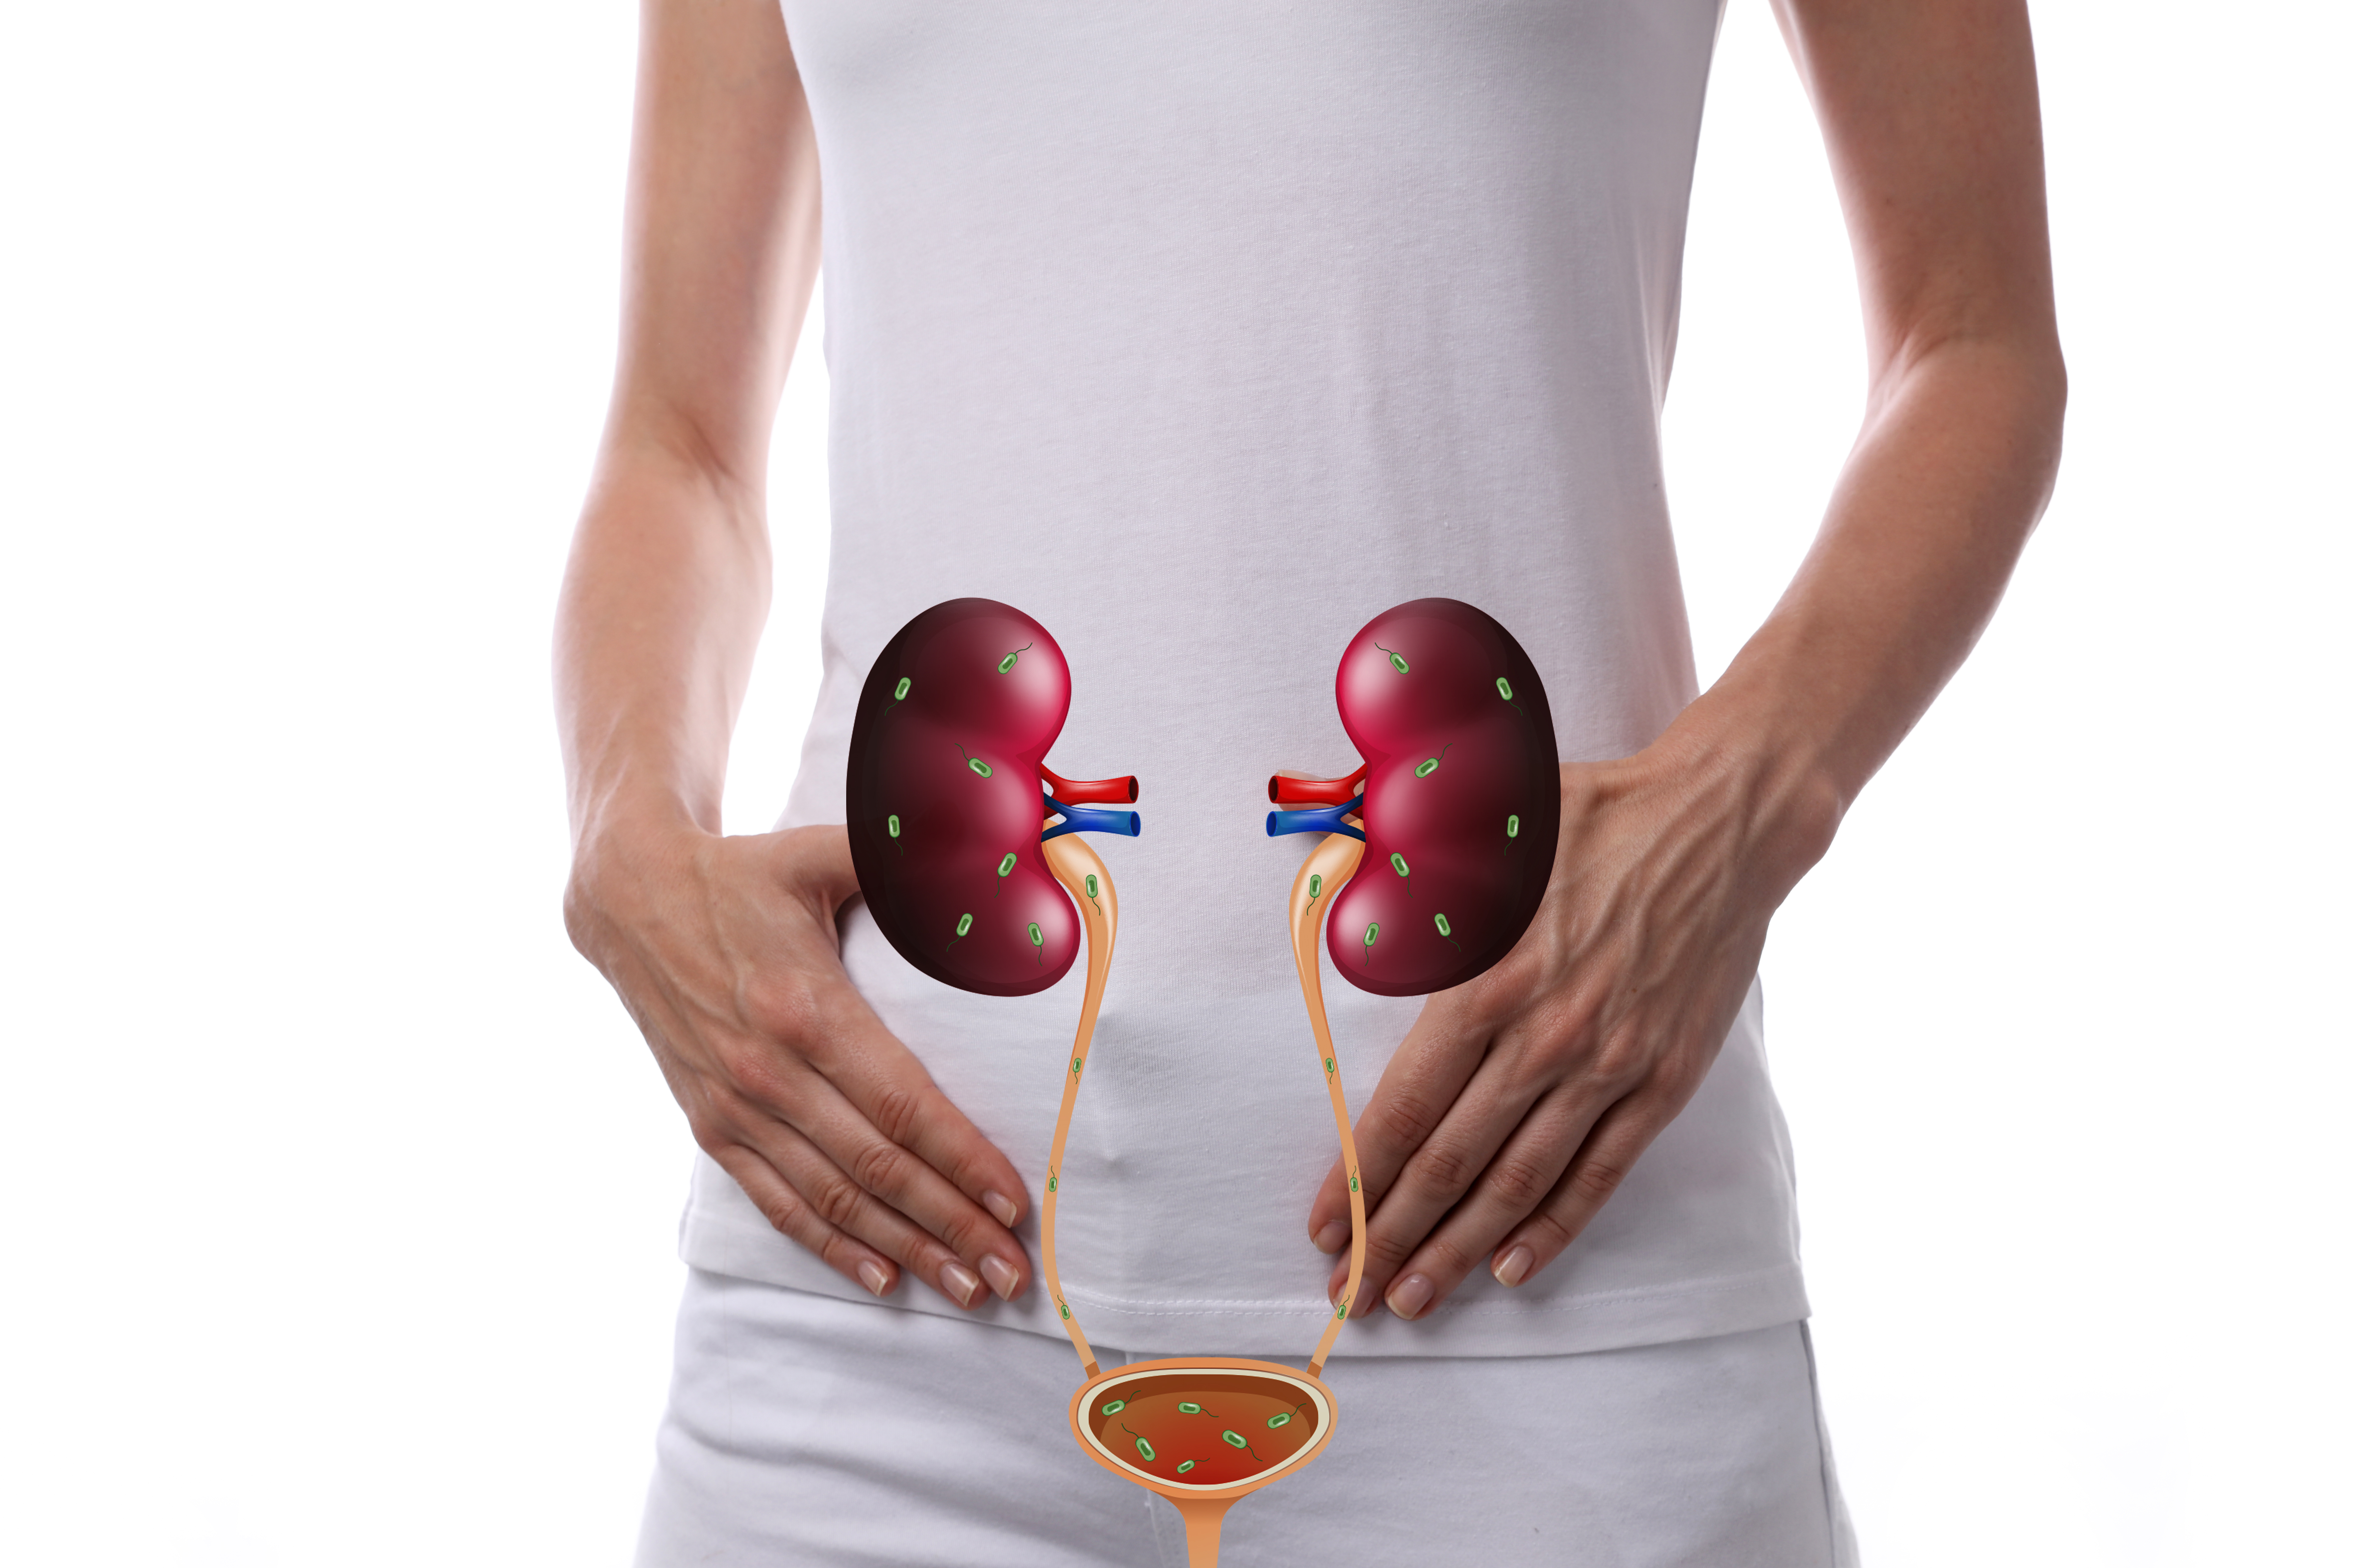 Image of kidney and bladder overlaying on stomach to showcase placement.